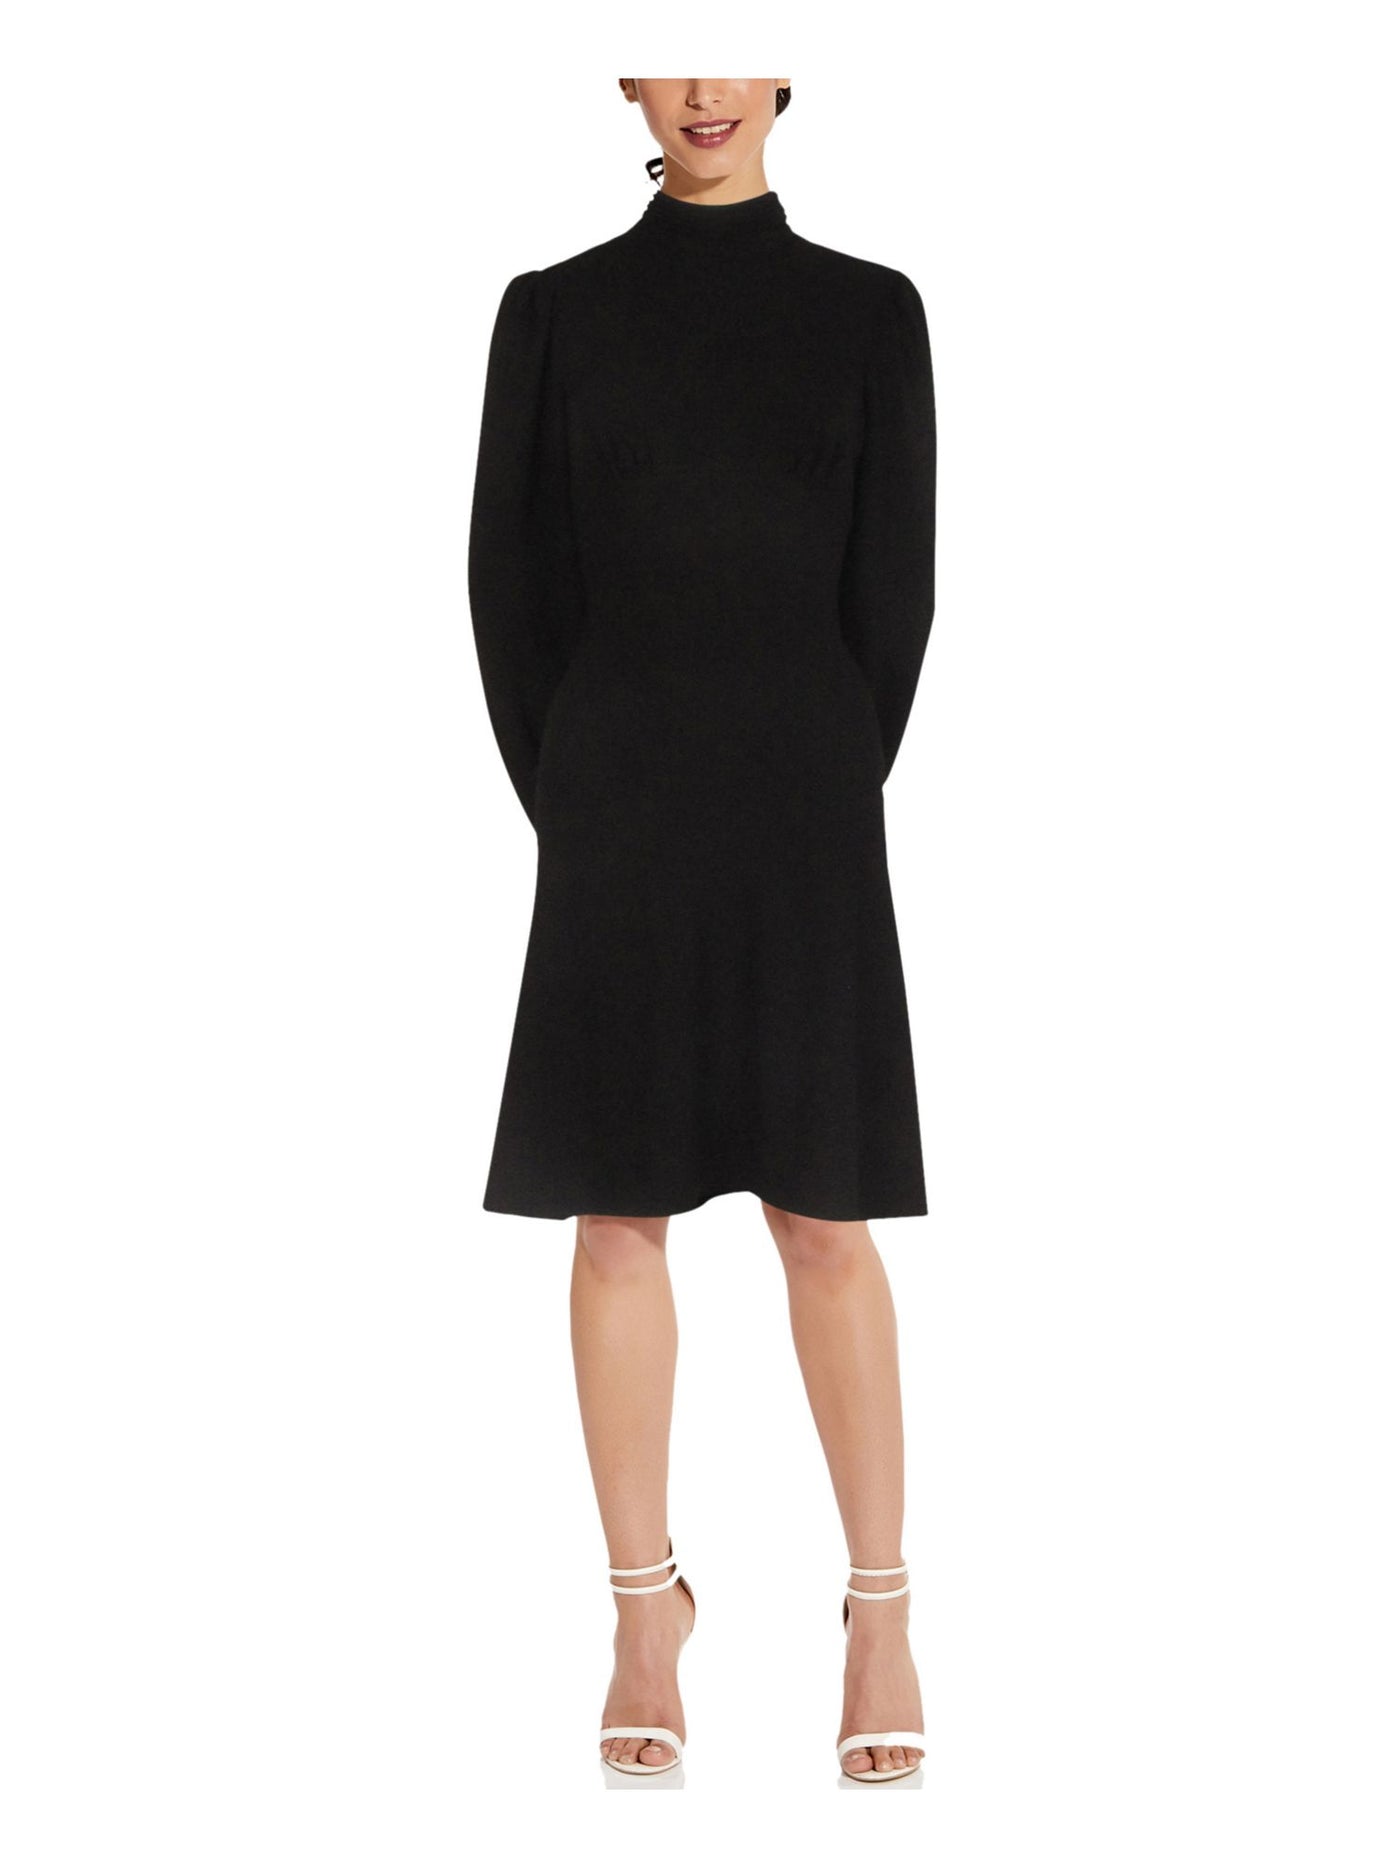 ADRIANNA PAPELL Womens Black Mock Neck Long Sleeve Above The Knee Wear To Work Shift Dress 10